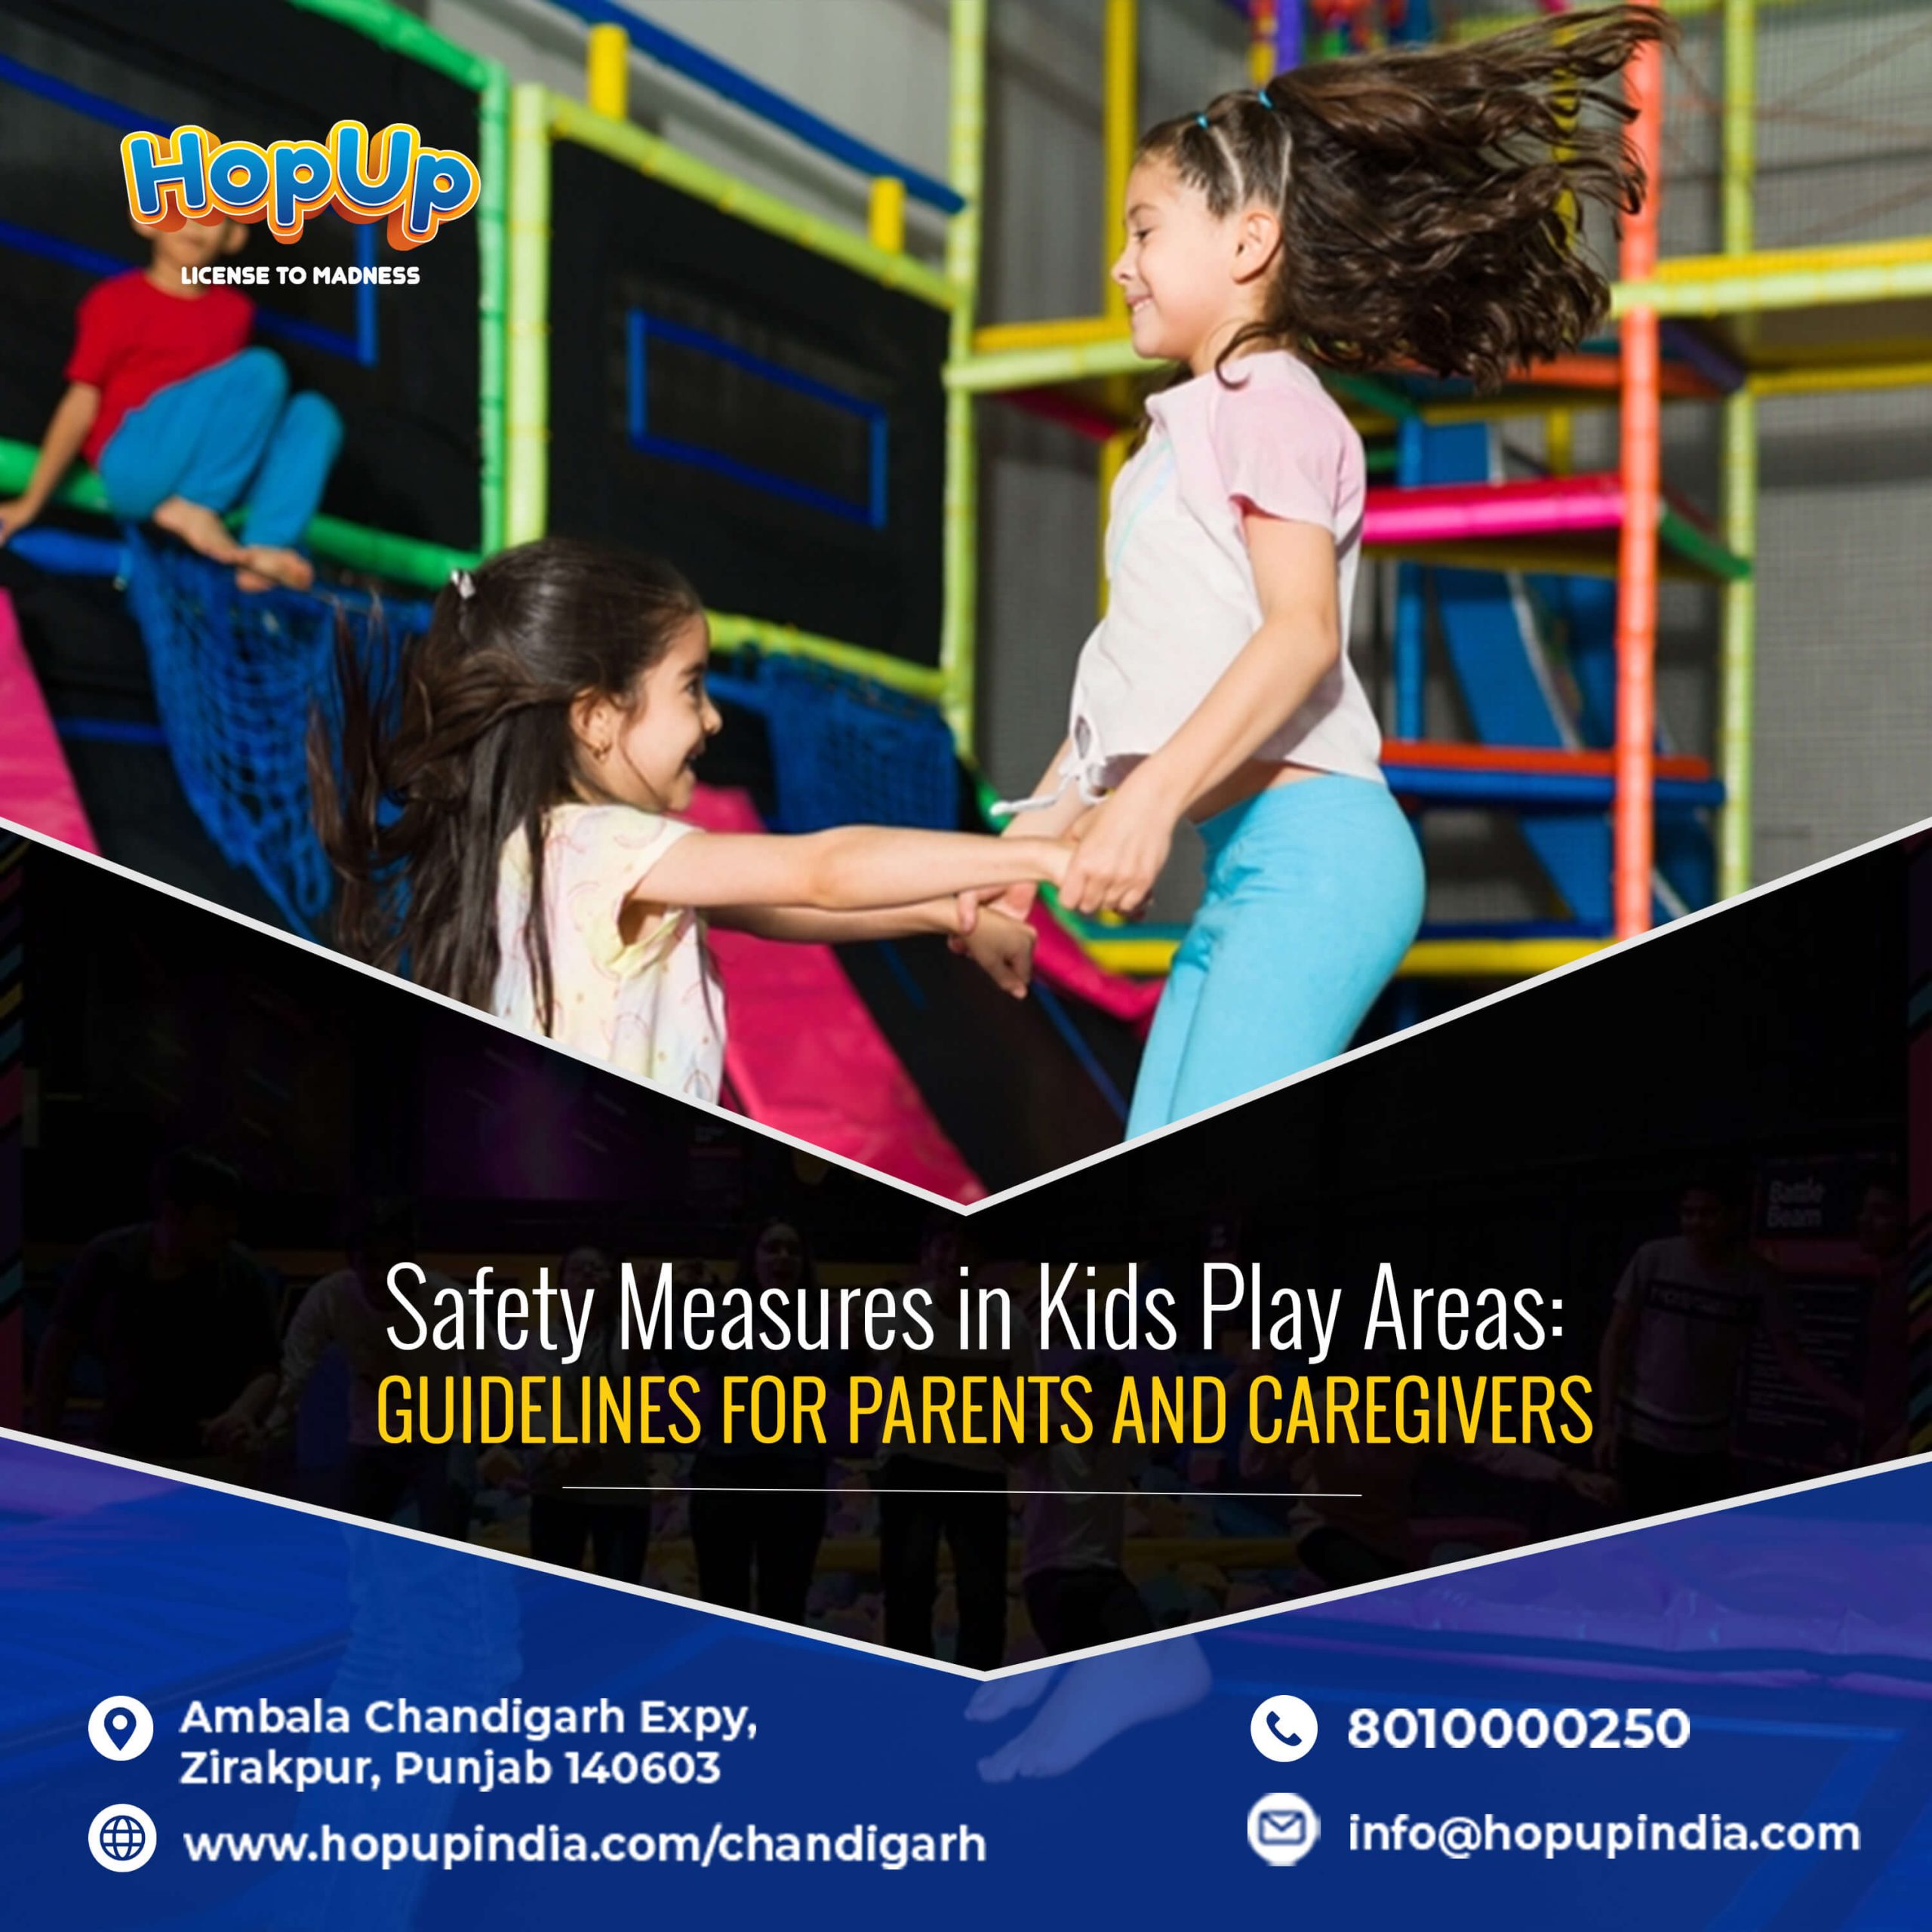 Safety Measures in Kids Play Areas: Guidelines for Parents and Caregivers